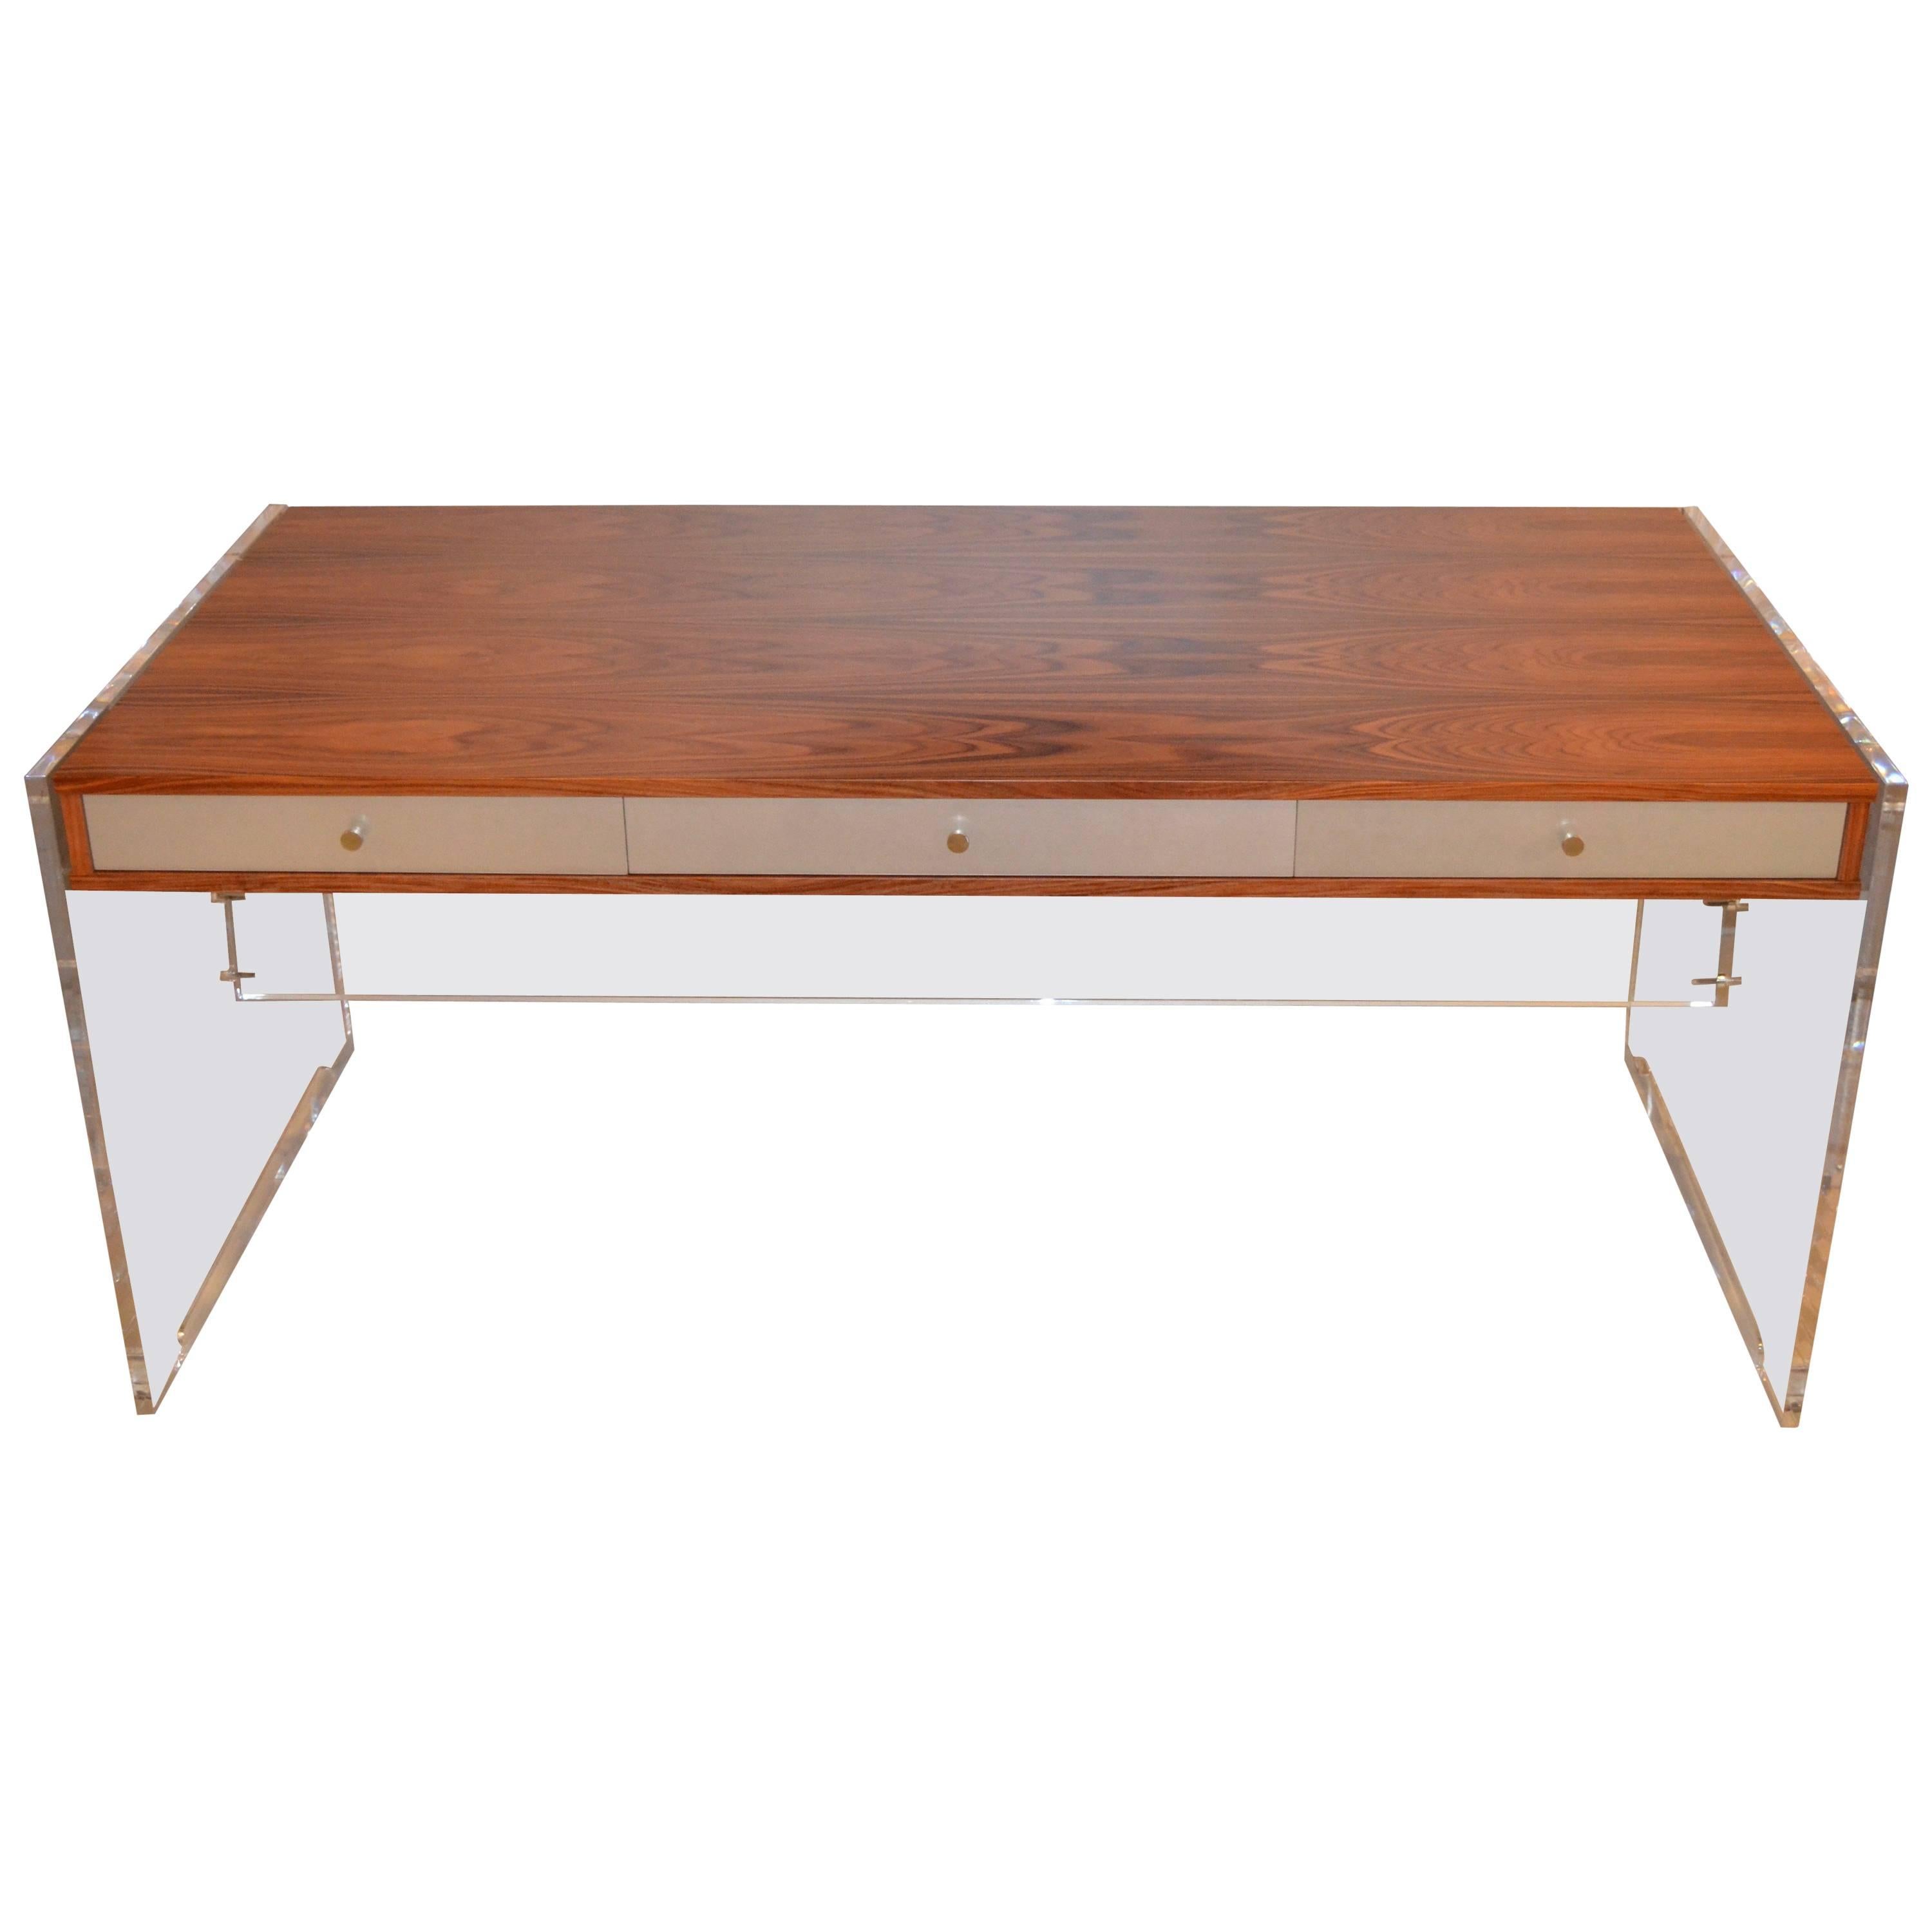 Poul Norreklit Desk in Mahogany and Lucite